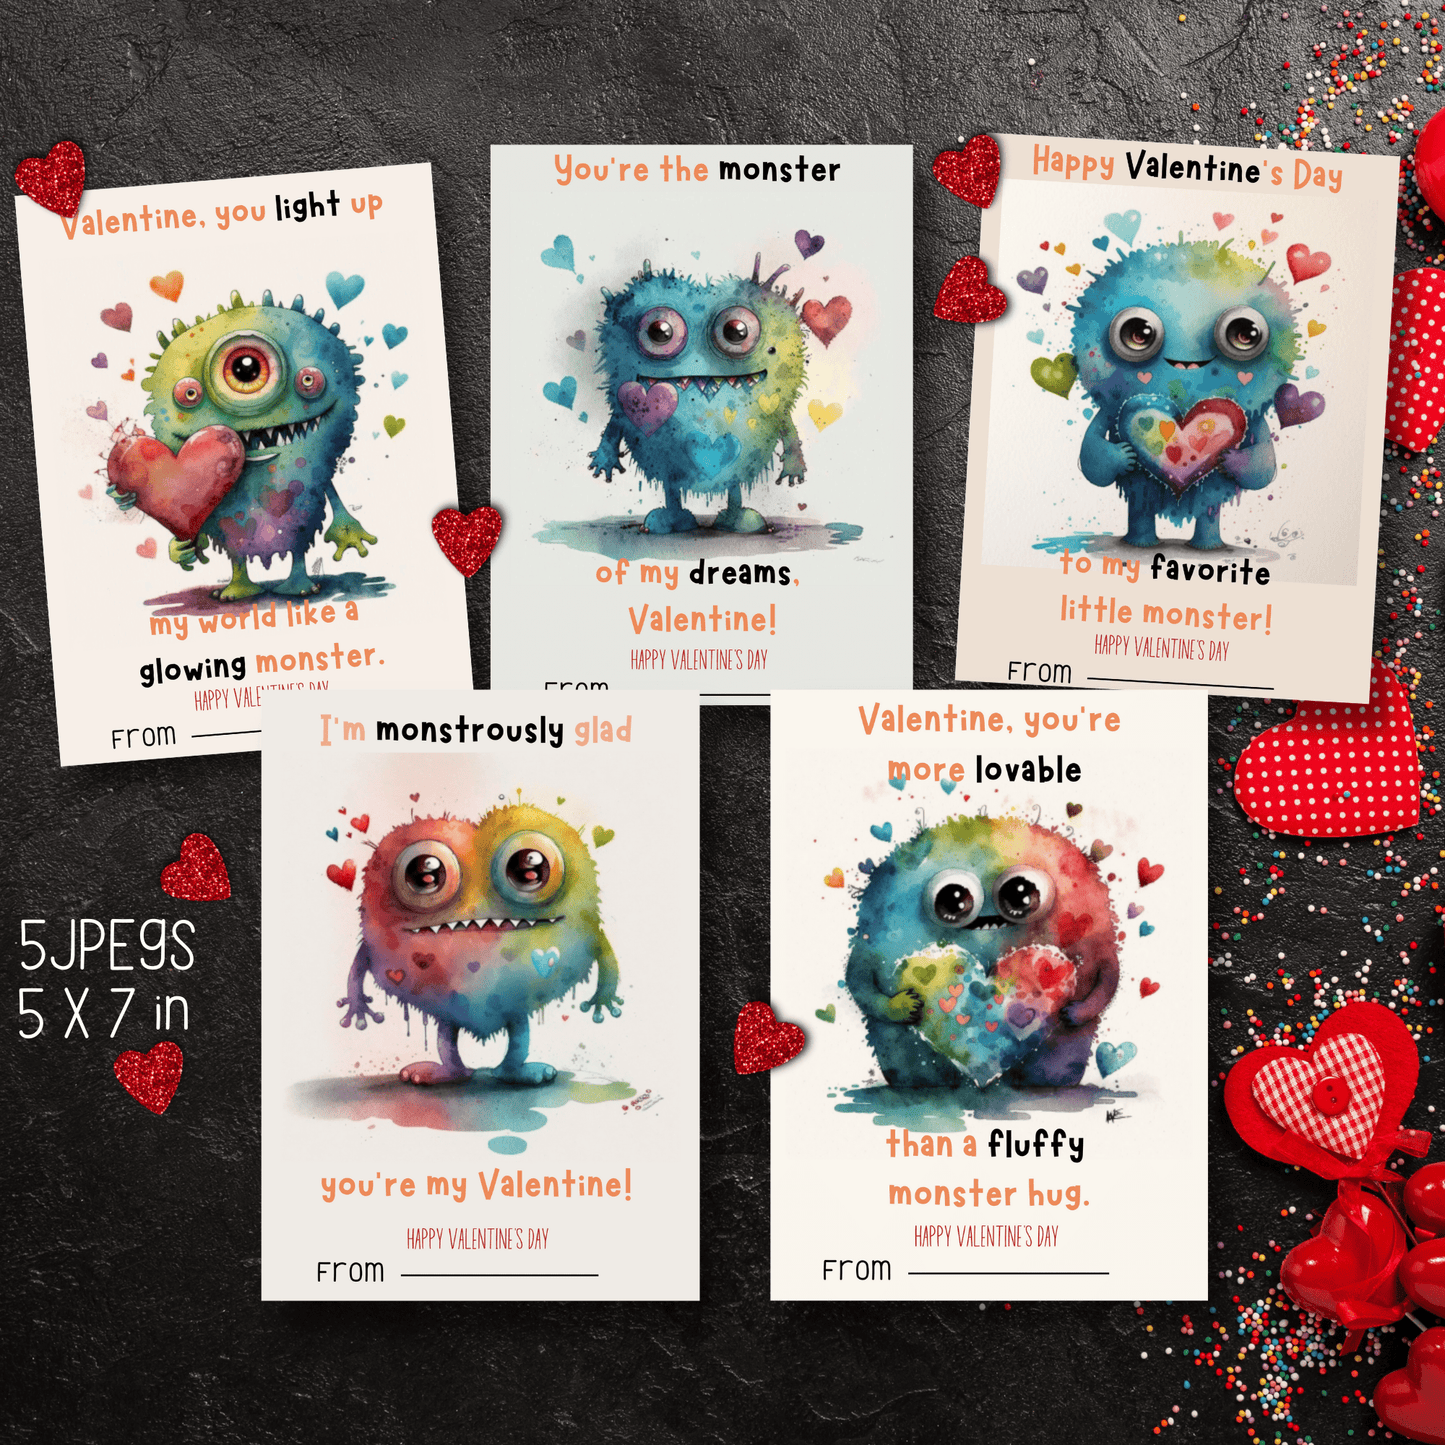 Make Valentine's Day Spooktacular with Printable Monster Cards and Gift Tags - Instant Download #V21